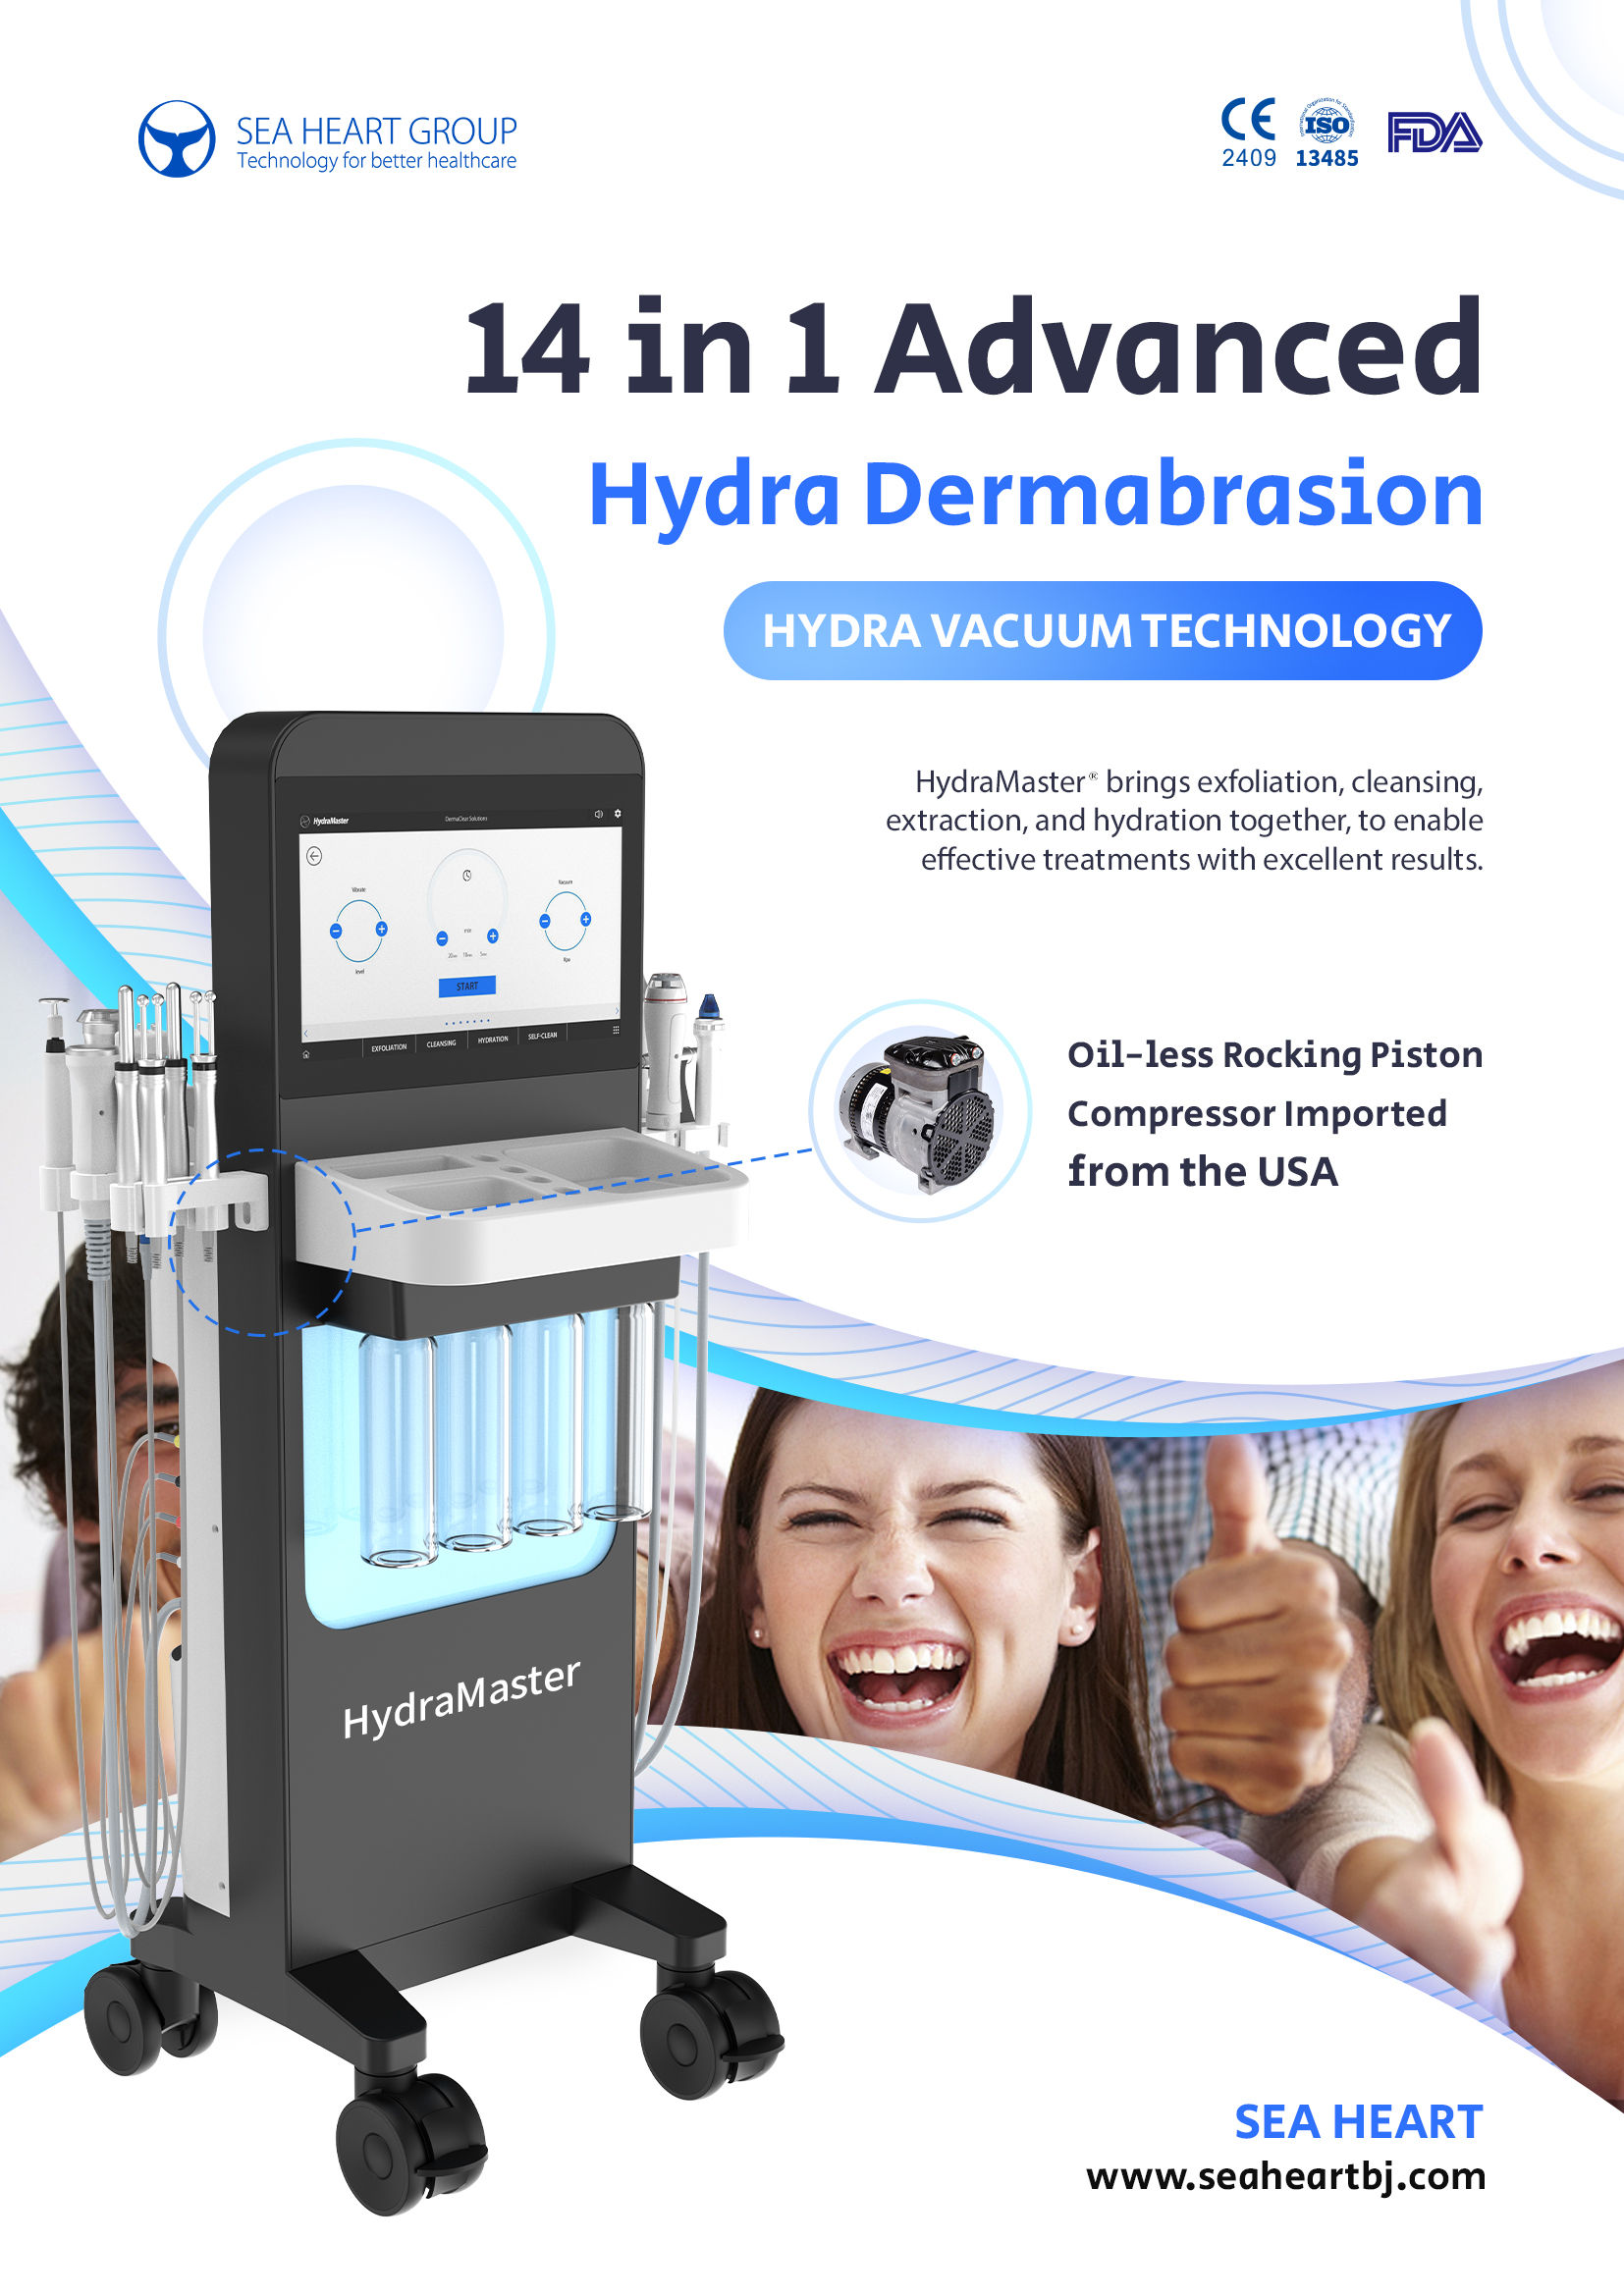 9 in 1 HYDRA BEAUTY MICRODERMABRASION